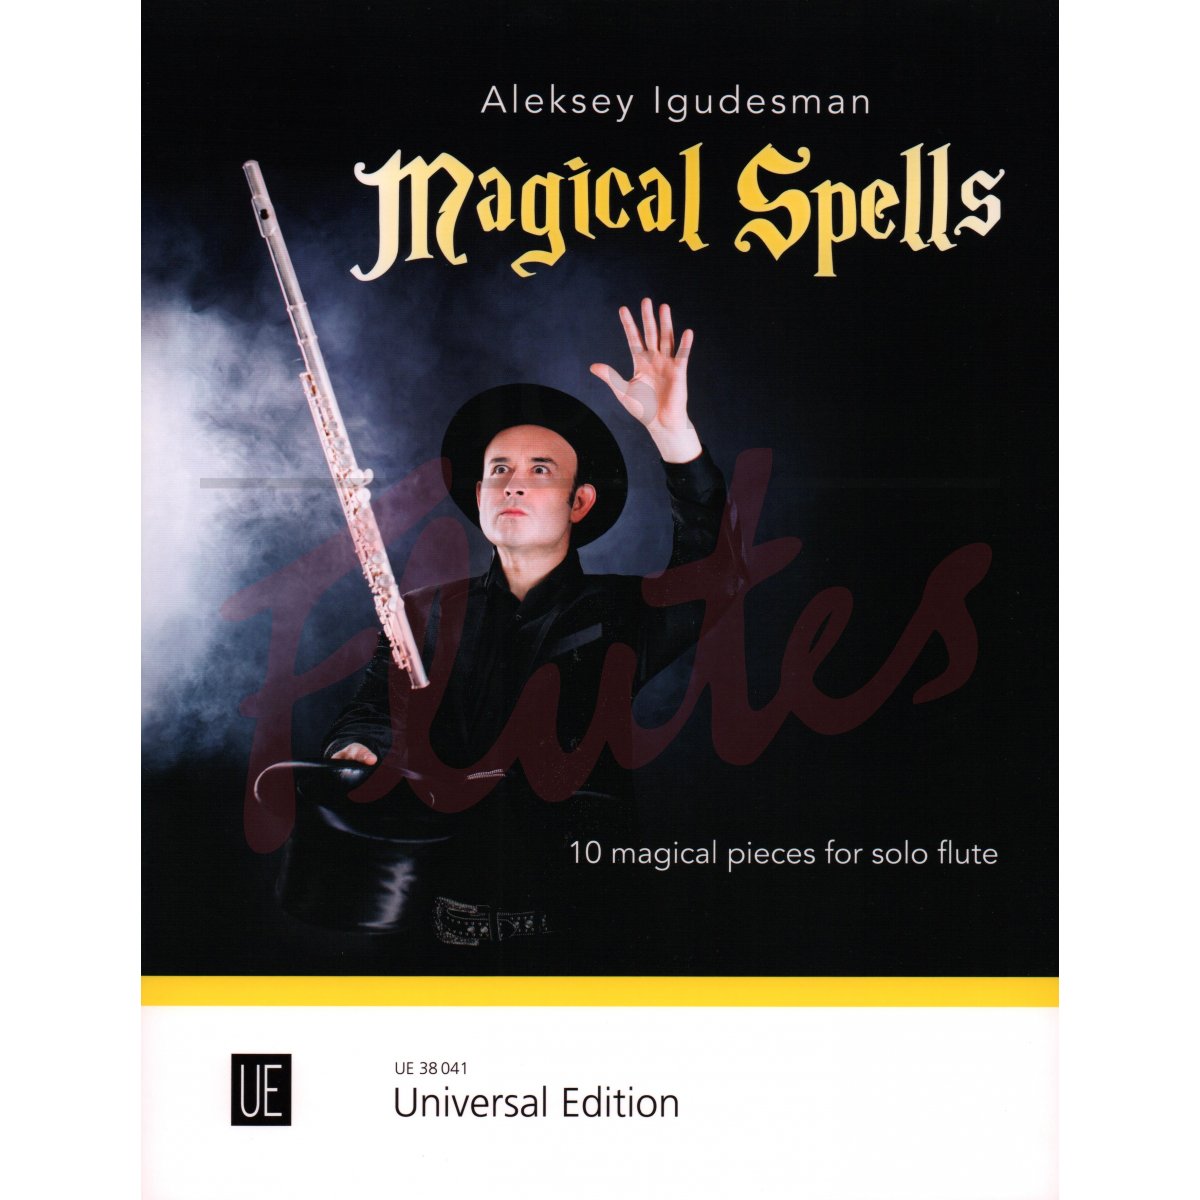 Magical Spells: 10 Magical Pieces for Solo Flute